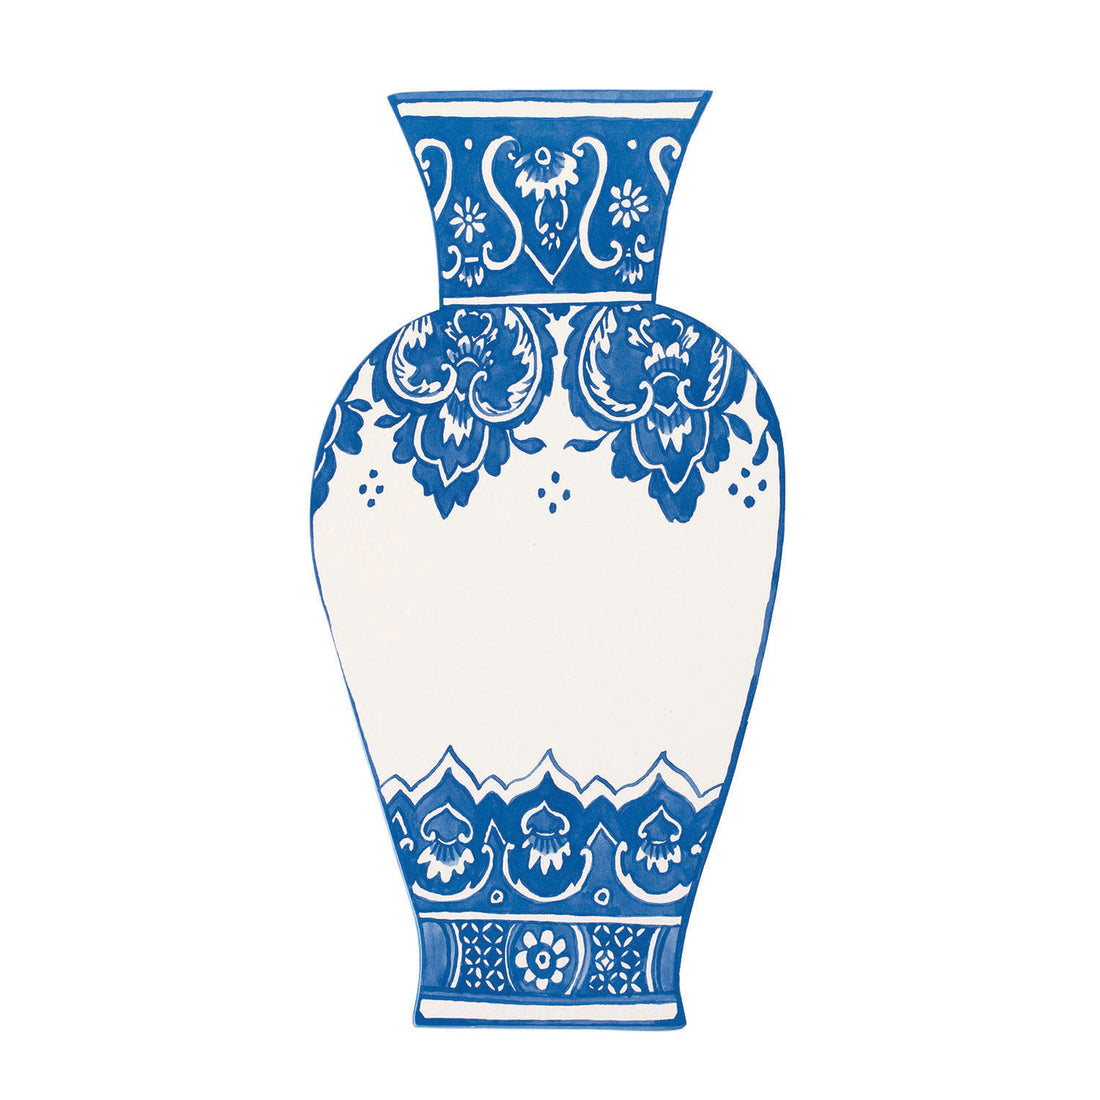 A Hester &amp; Cook China Blue Vase Table Accent, part of a collection, on a white background.